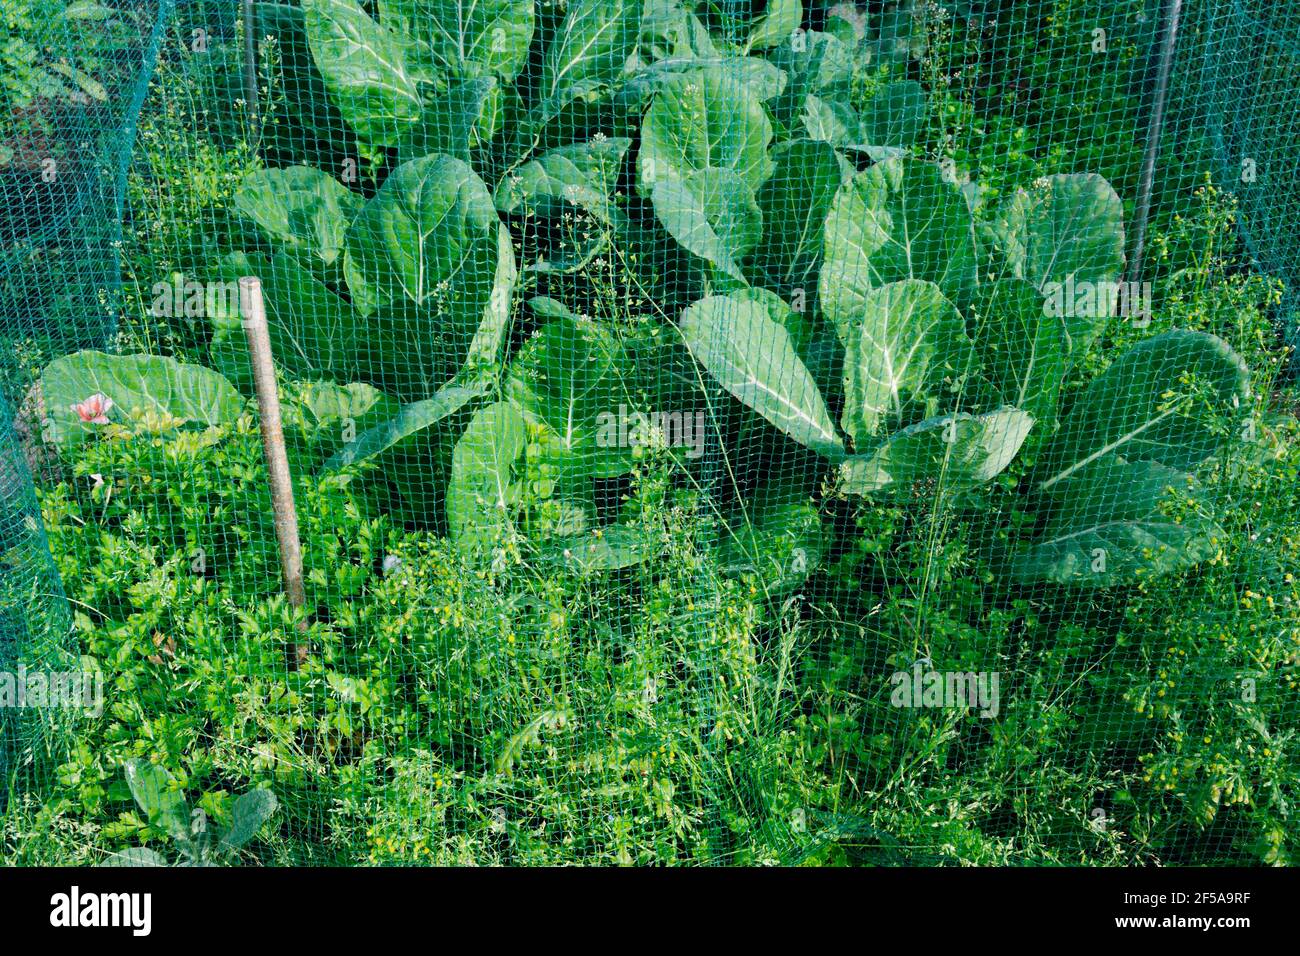 Collard greens 'Collard Champion', growing in weedy plot under protection of butterfly netting. Stock Photo